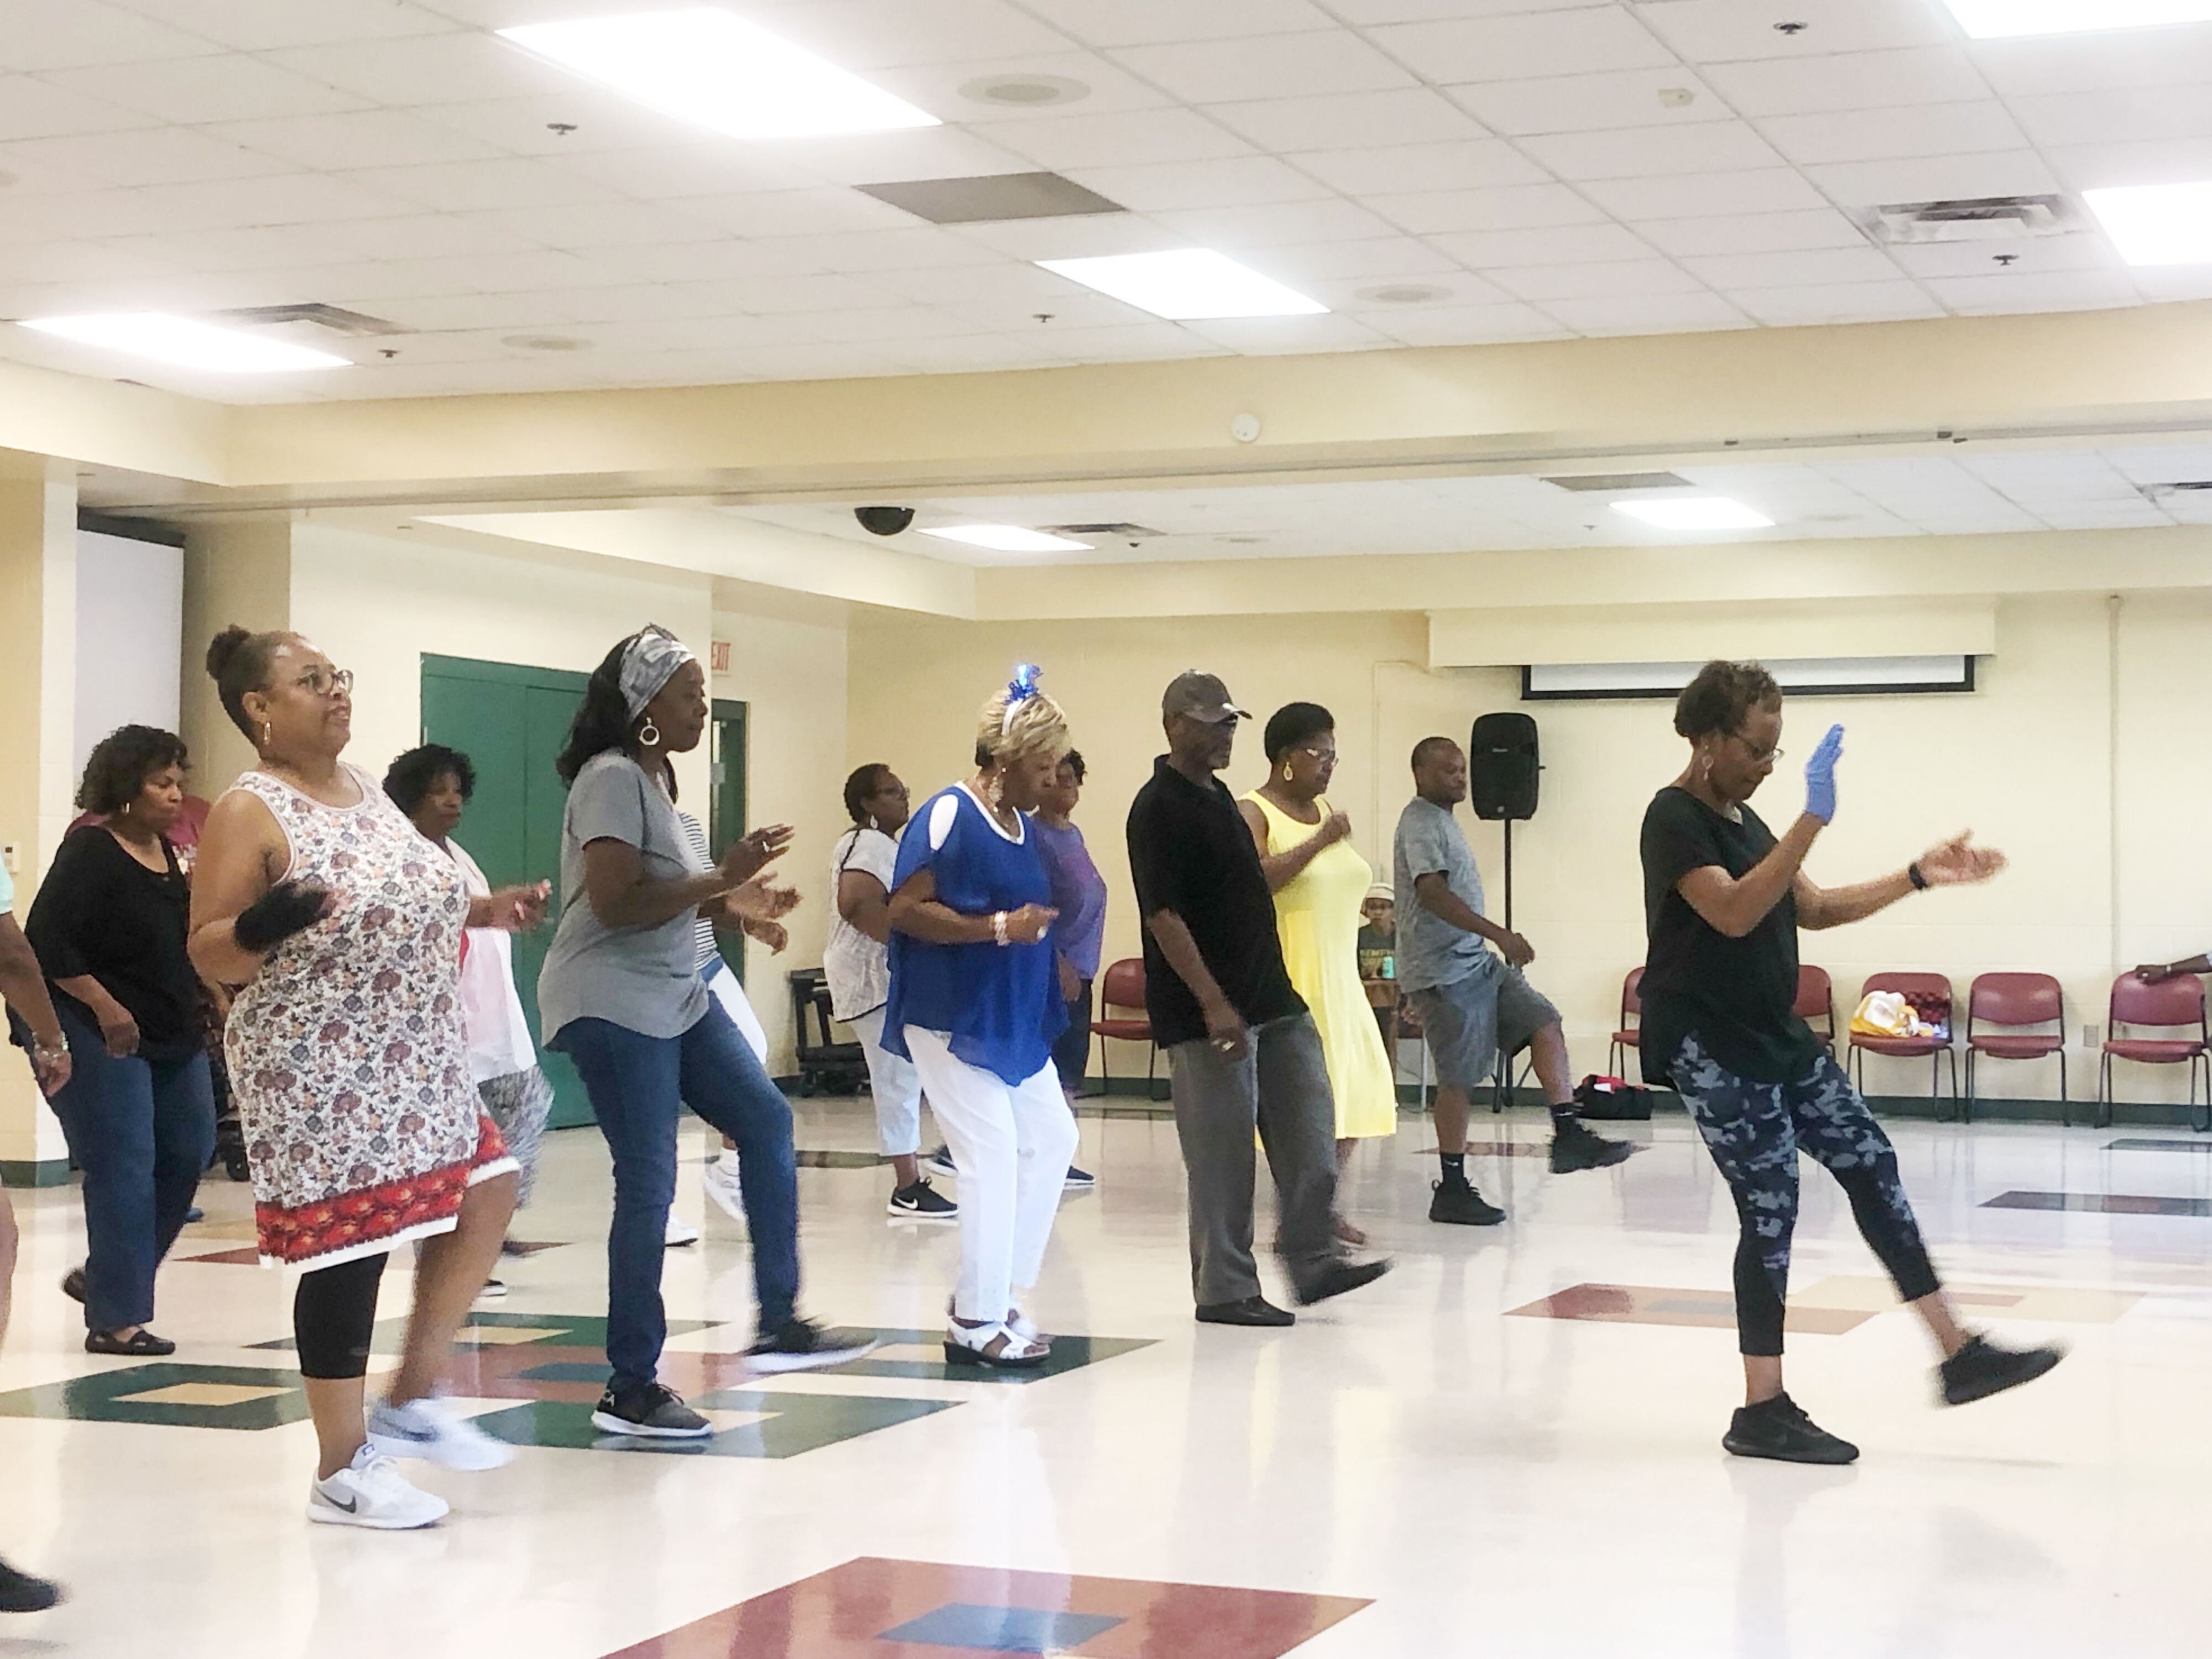 Instructor Roxie Jones leads an energetic group of line dancers at the Hickory Hill Community Center's senior line dancing class. (AJ Dugger III)